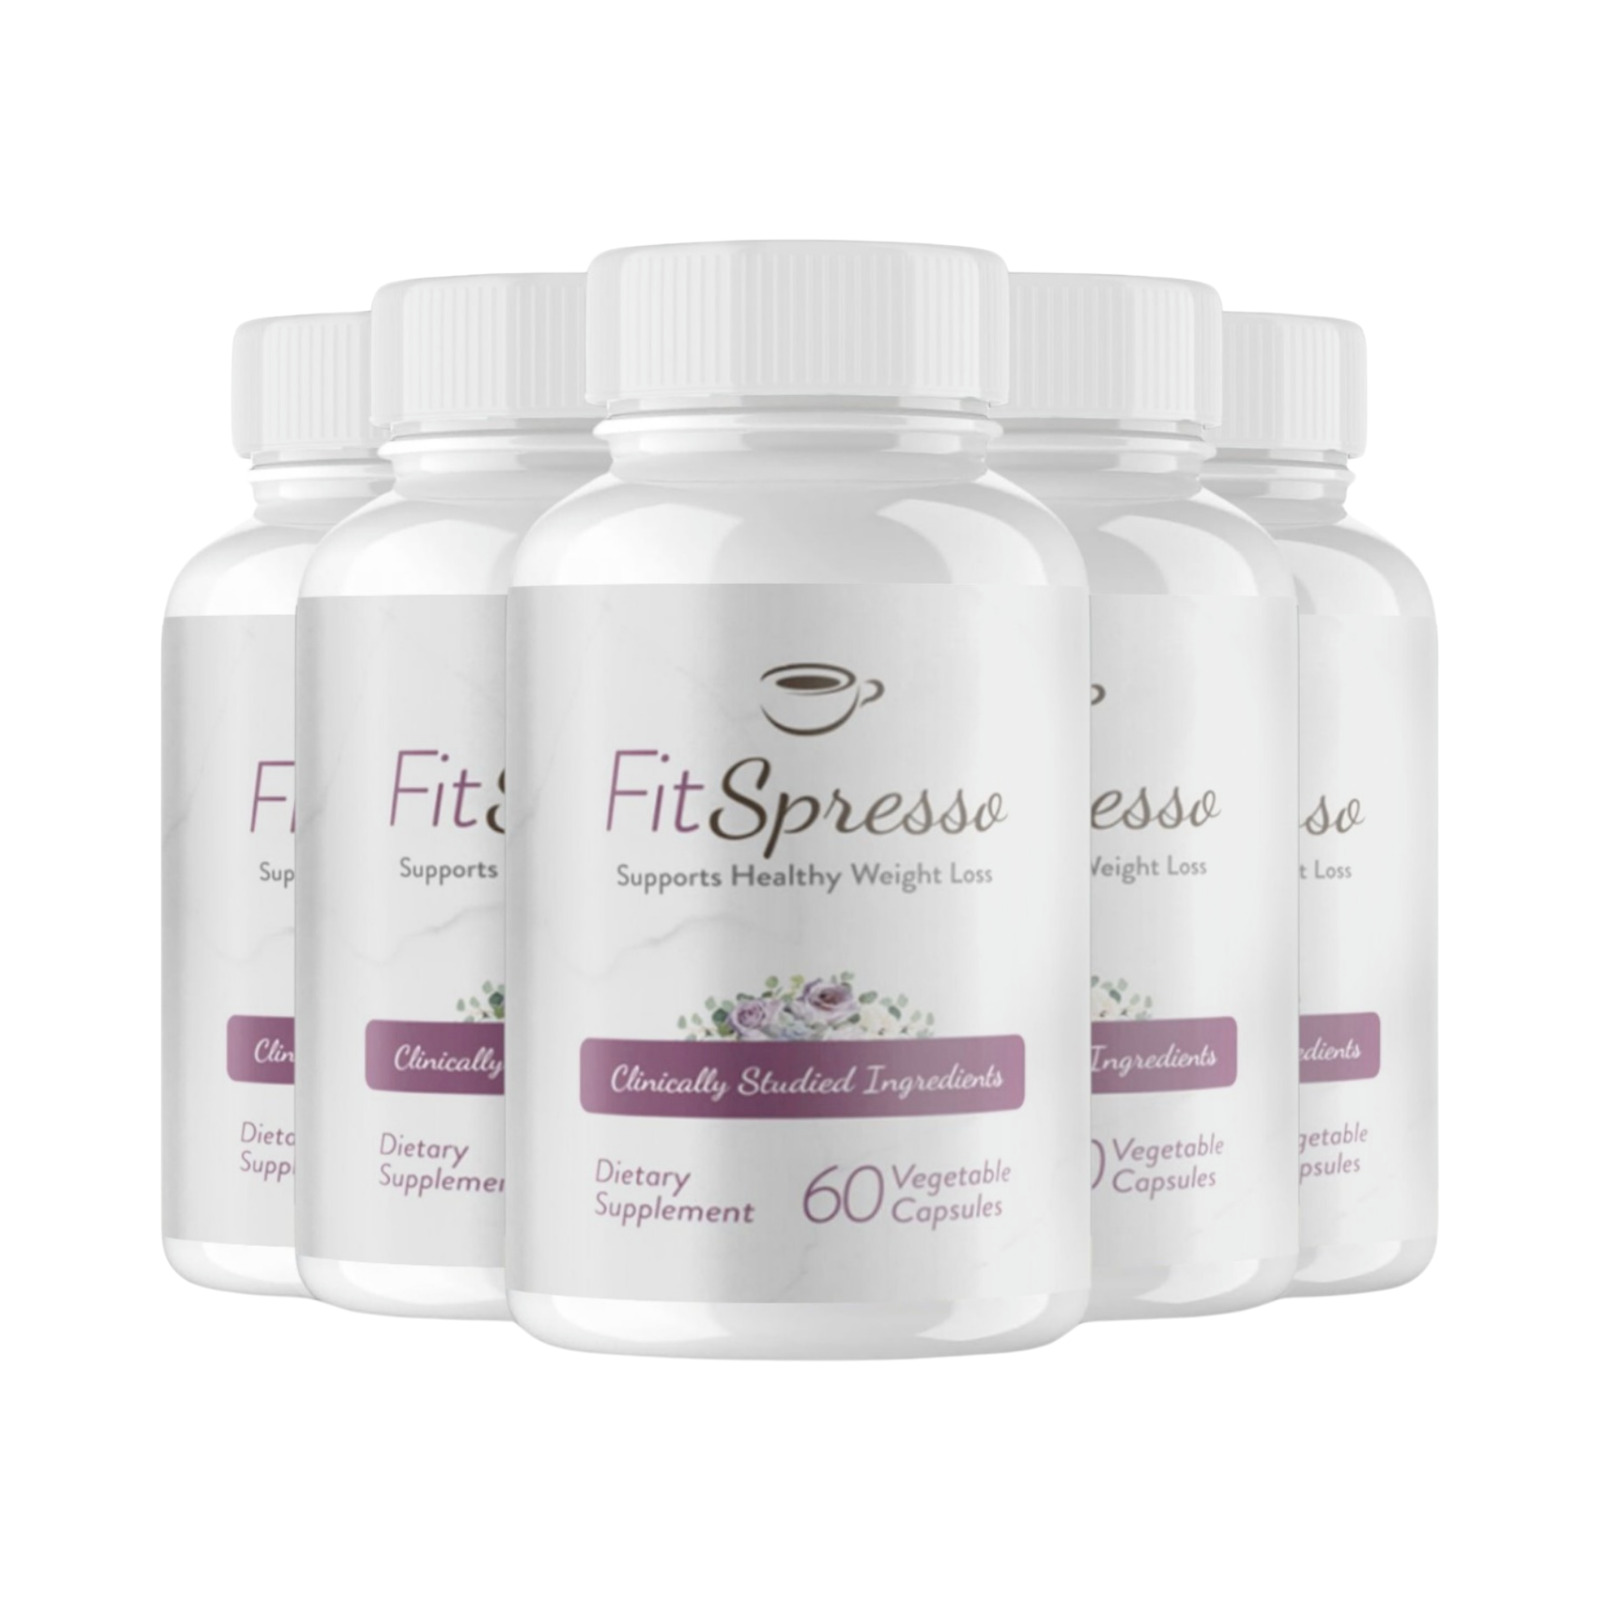 (5 PACK) FitSpresso Health Support Supplement- Fit Spresso